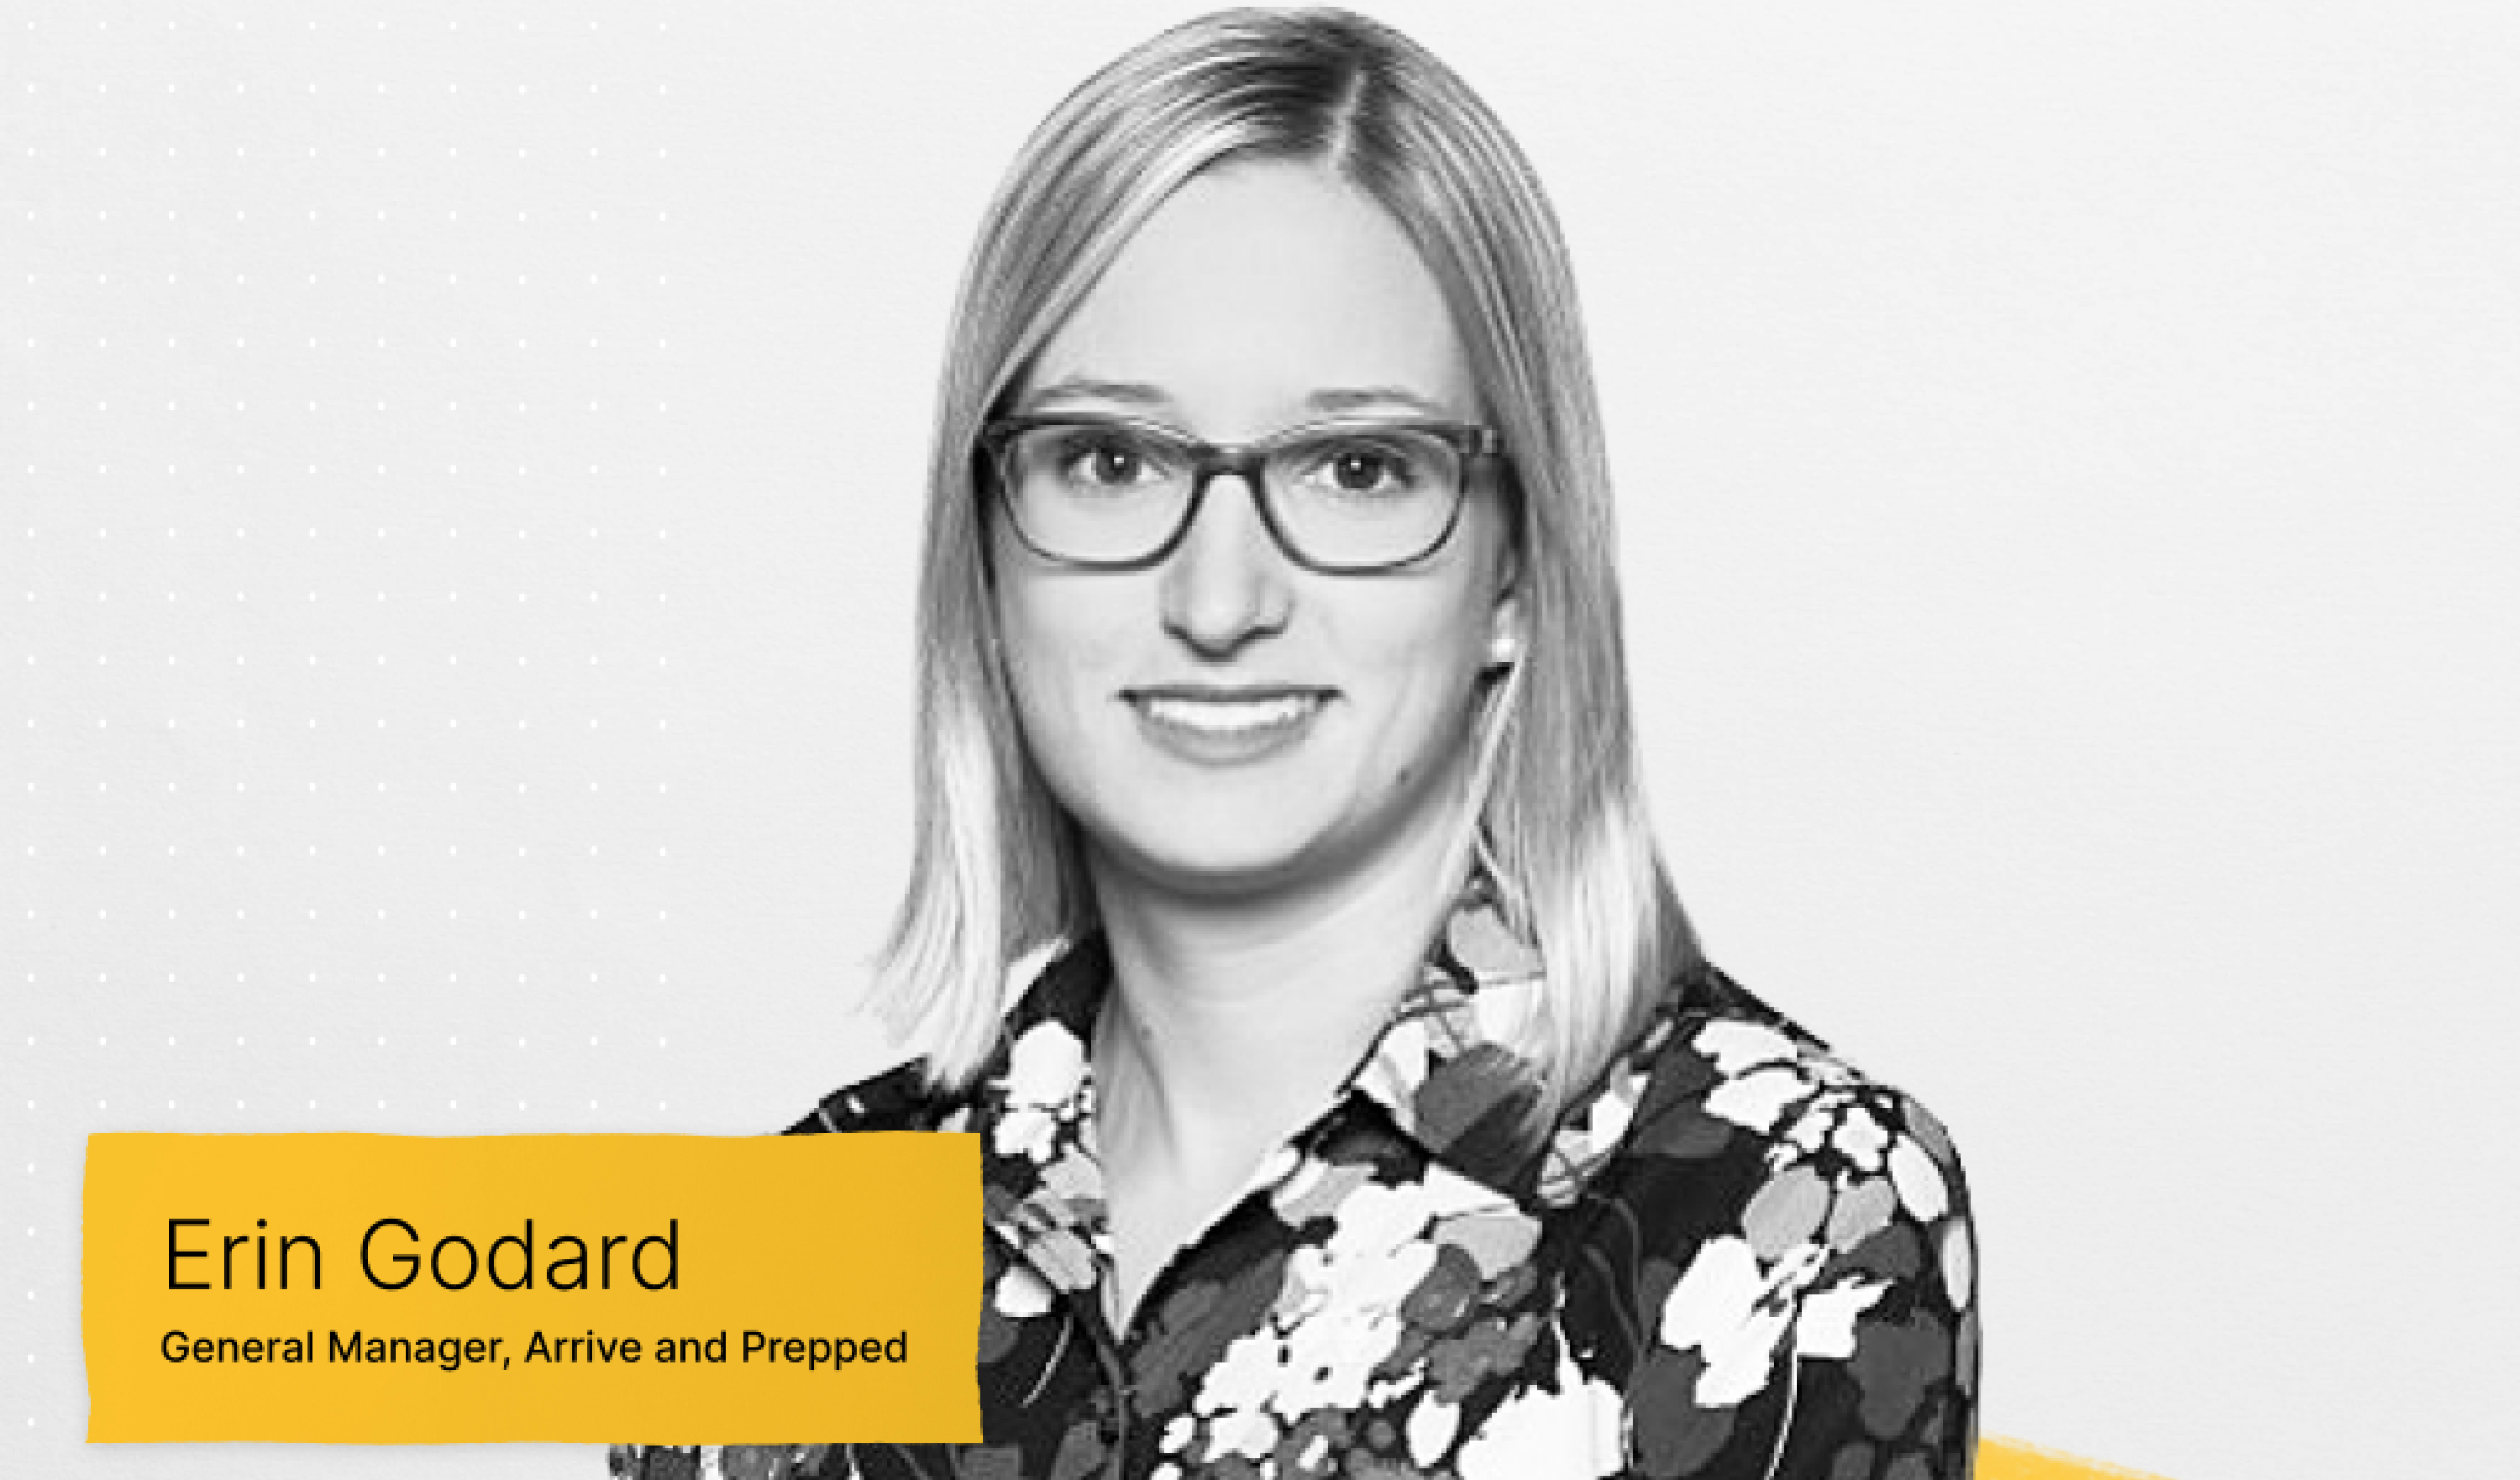 Conversation with Erin Godard, GM for Arrive & Prepped